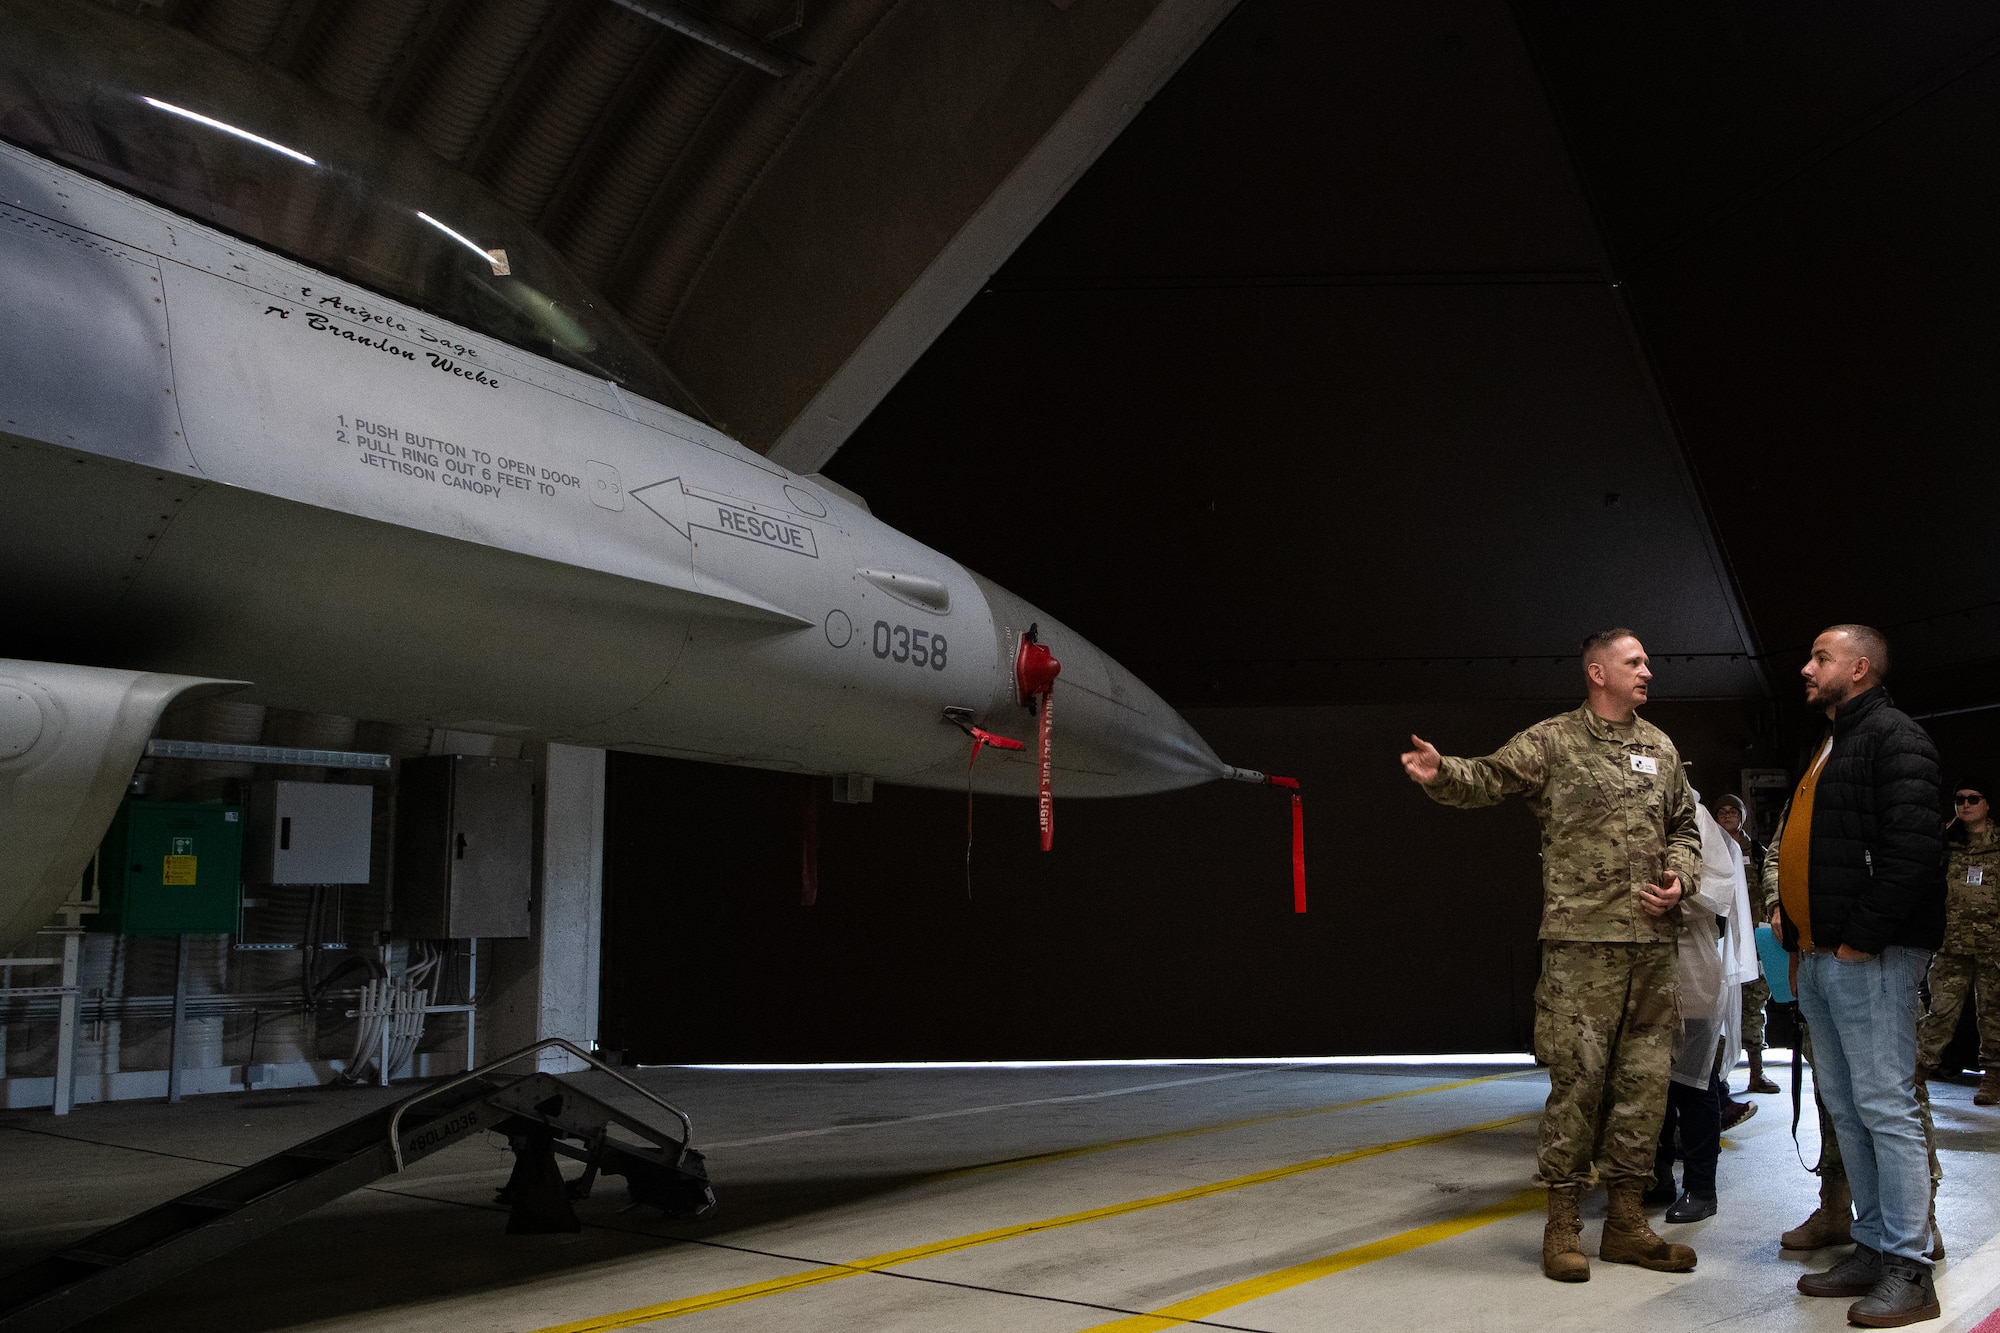 A U.S. Airman standing in a hangar gestures towards a fighter aircraft behind him as he faces a civilian who is looking at the aircraft.